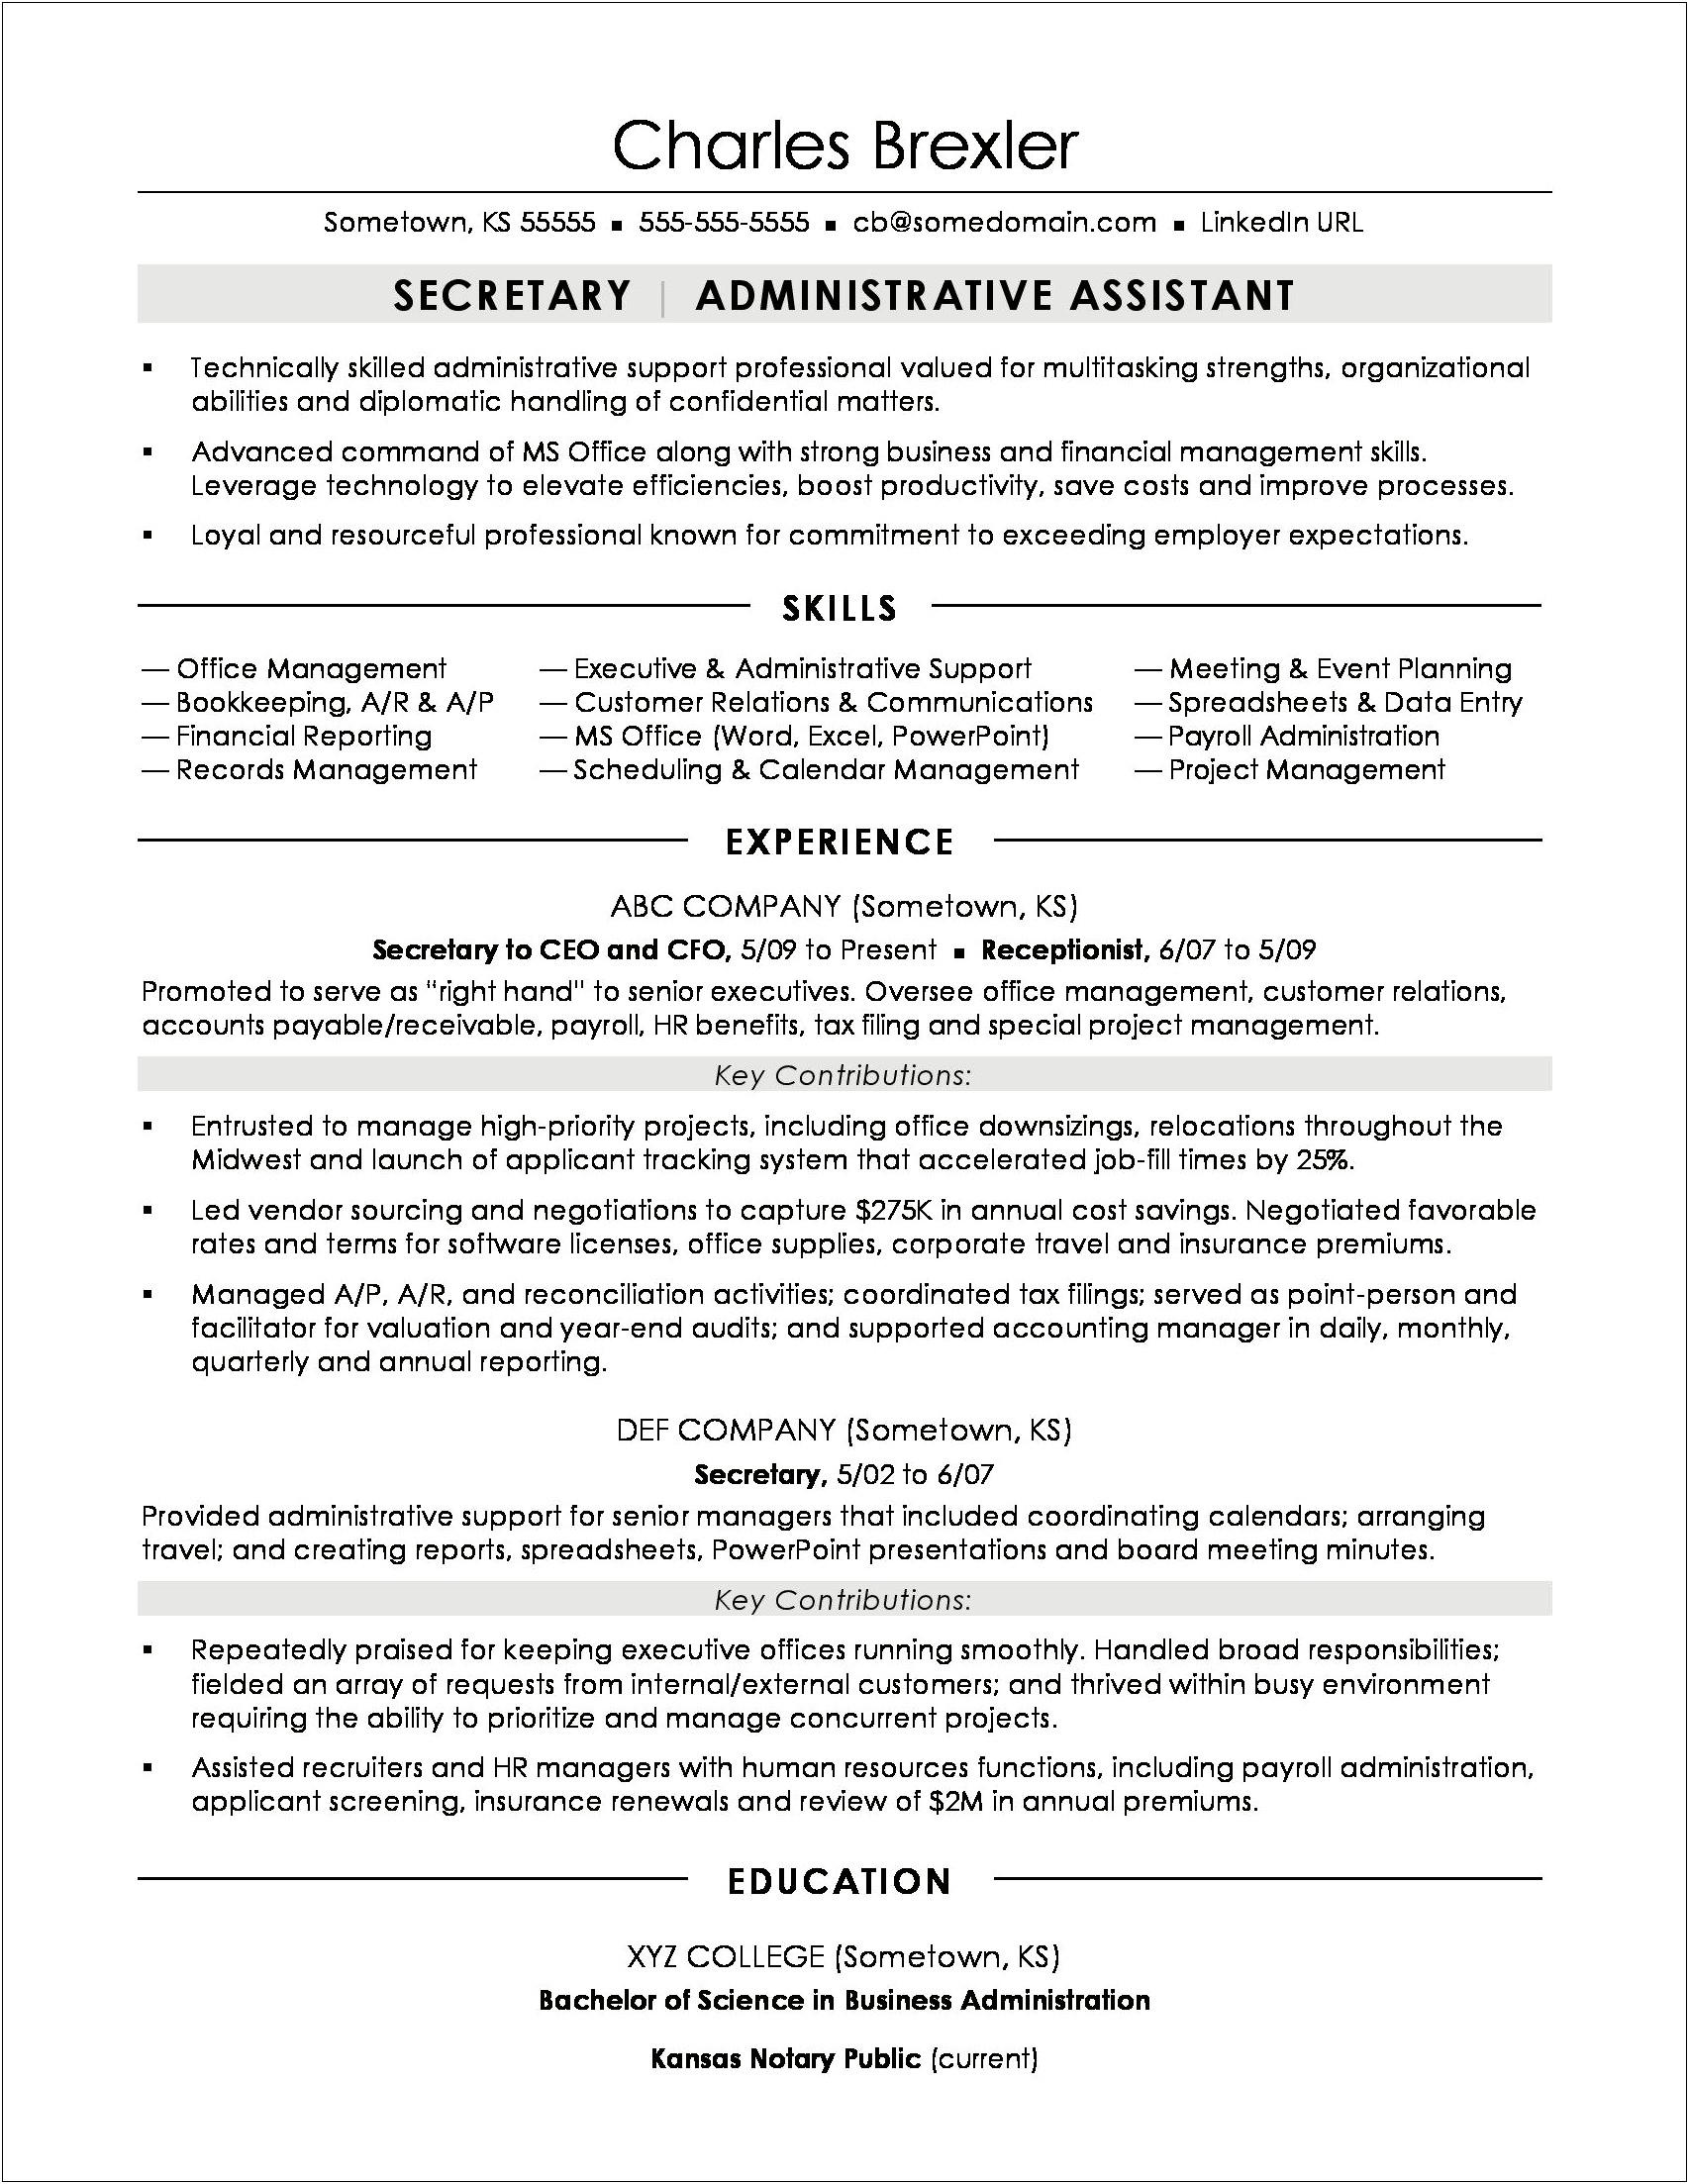 Resume Objective Lines For Secretary Position